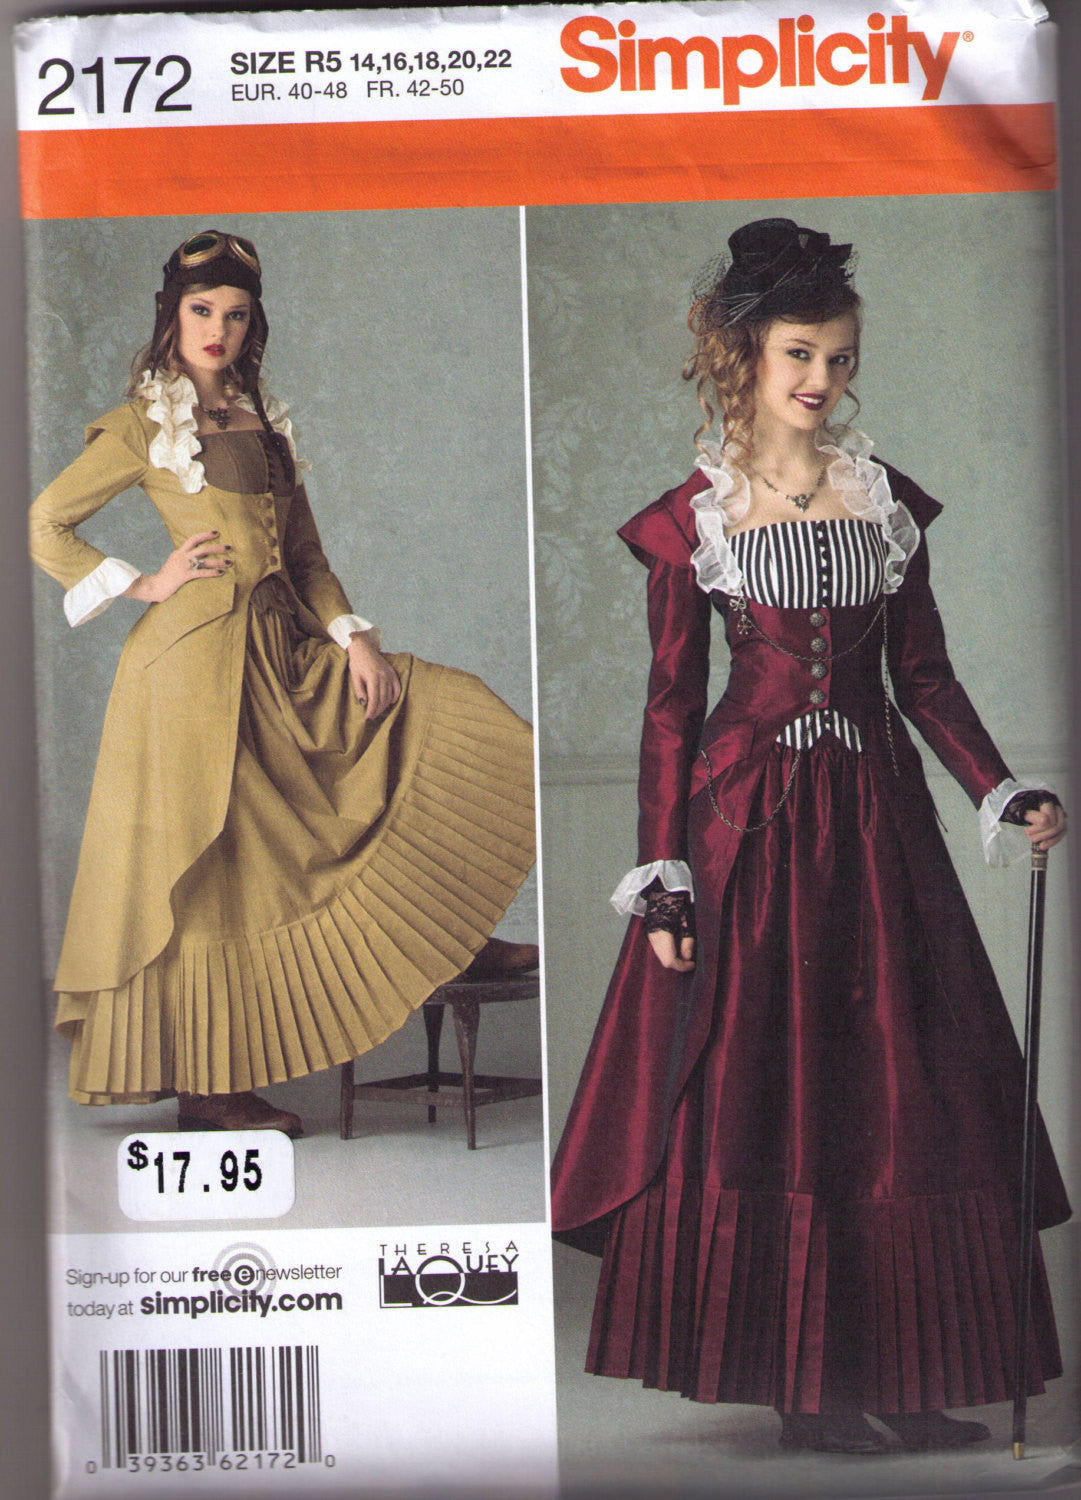 Steampunk coat bustier skirt pattern Simplicity 2172 Adult sizes 14, 16, 18 20, 22 - Patterns - Craft Supply House